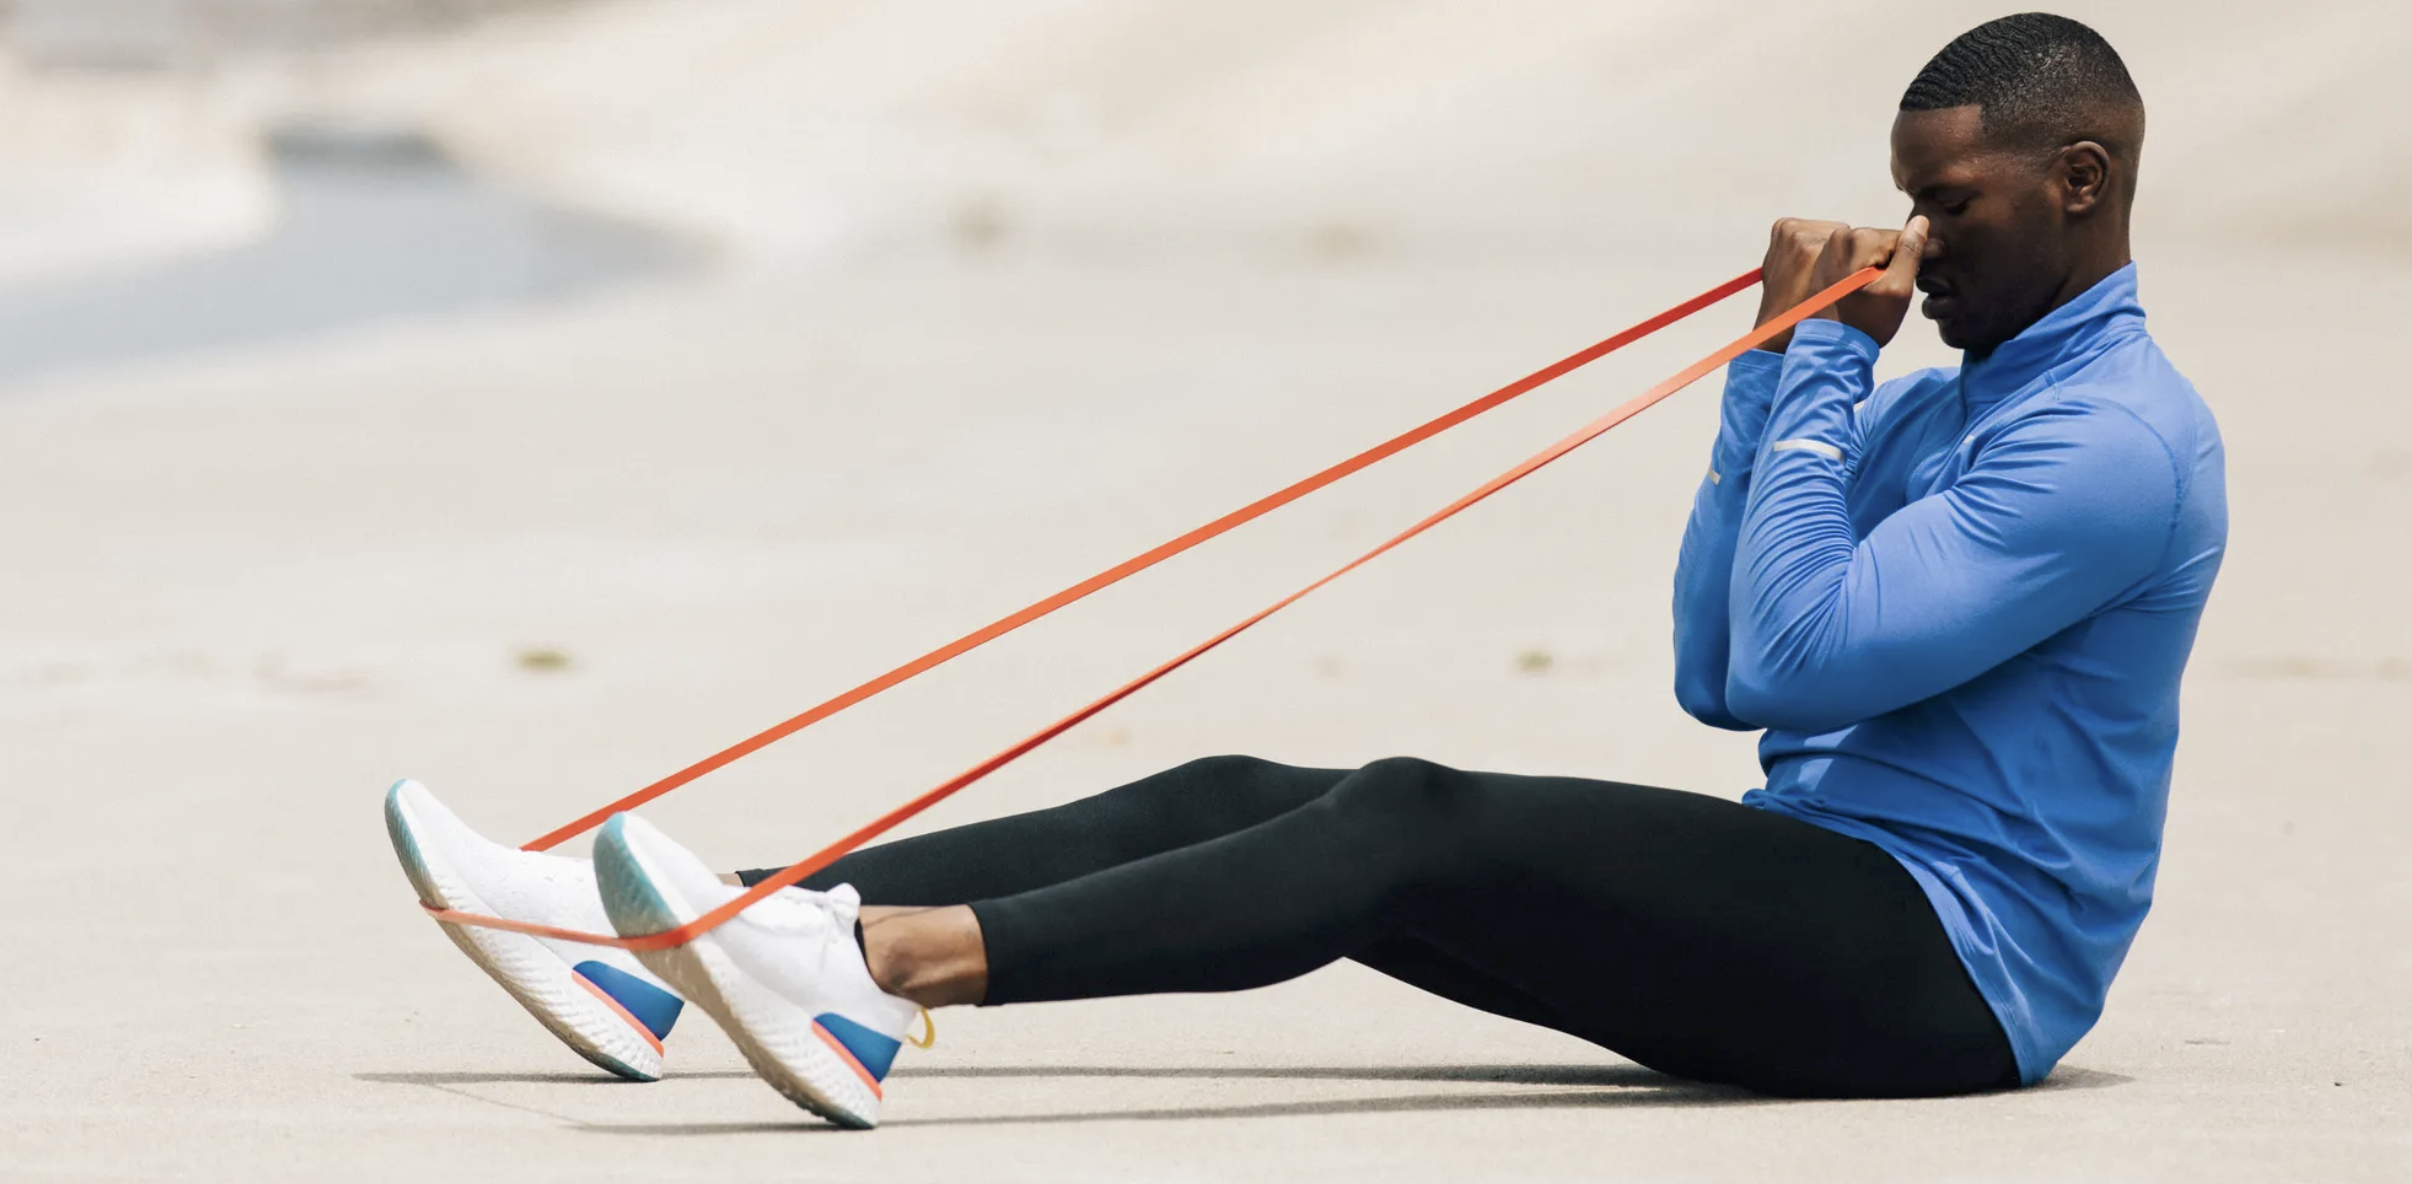 Use Resistance Bands for Flexibility, Mobility and Strength